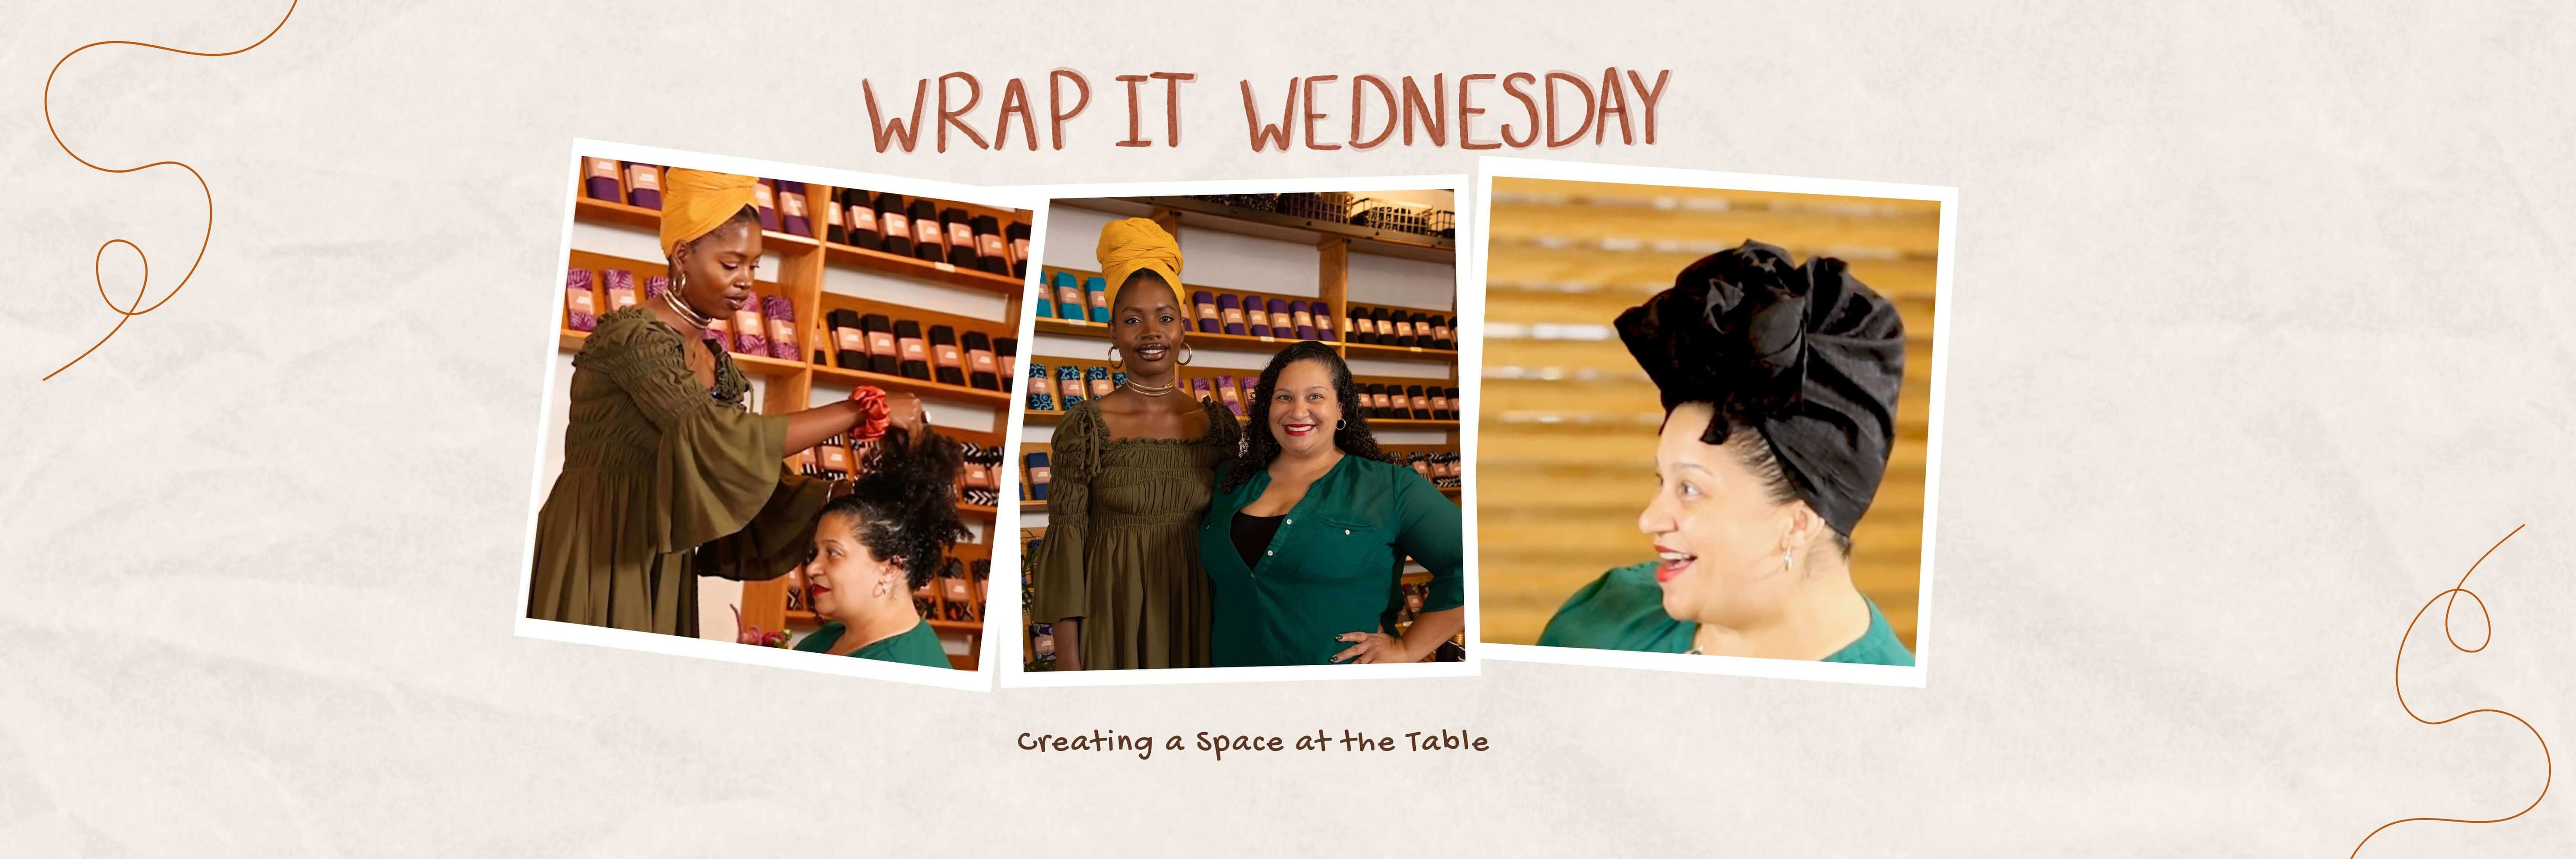 Wrap It Wednesday: Creating a Space at the Table with Amanda Johnston